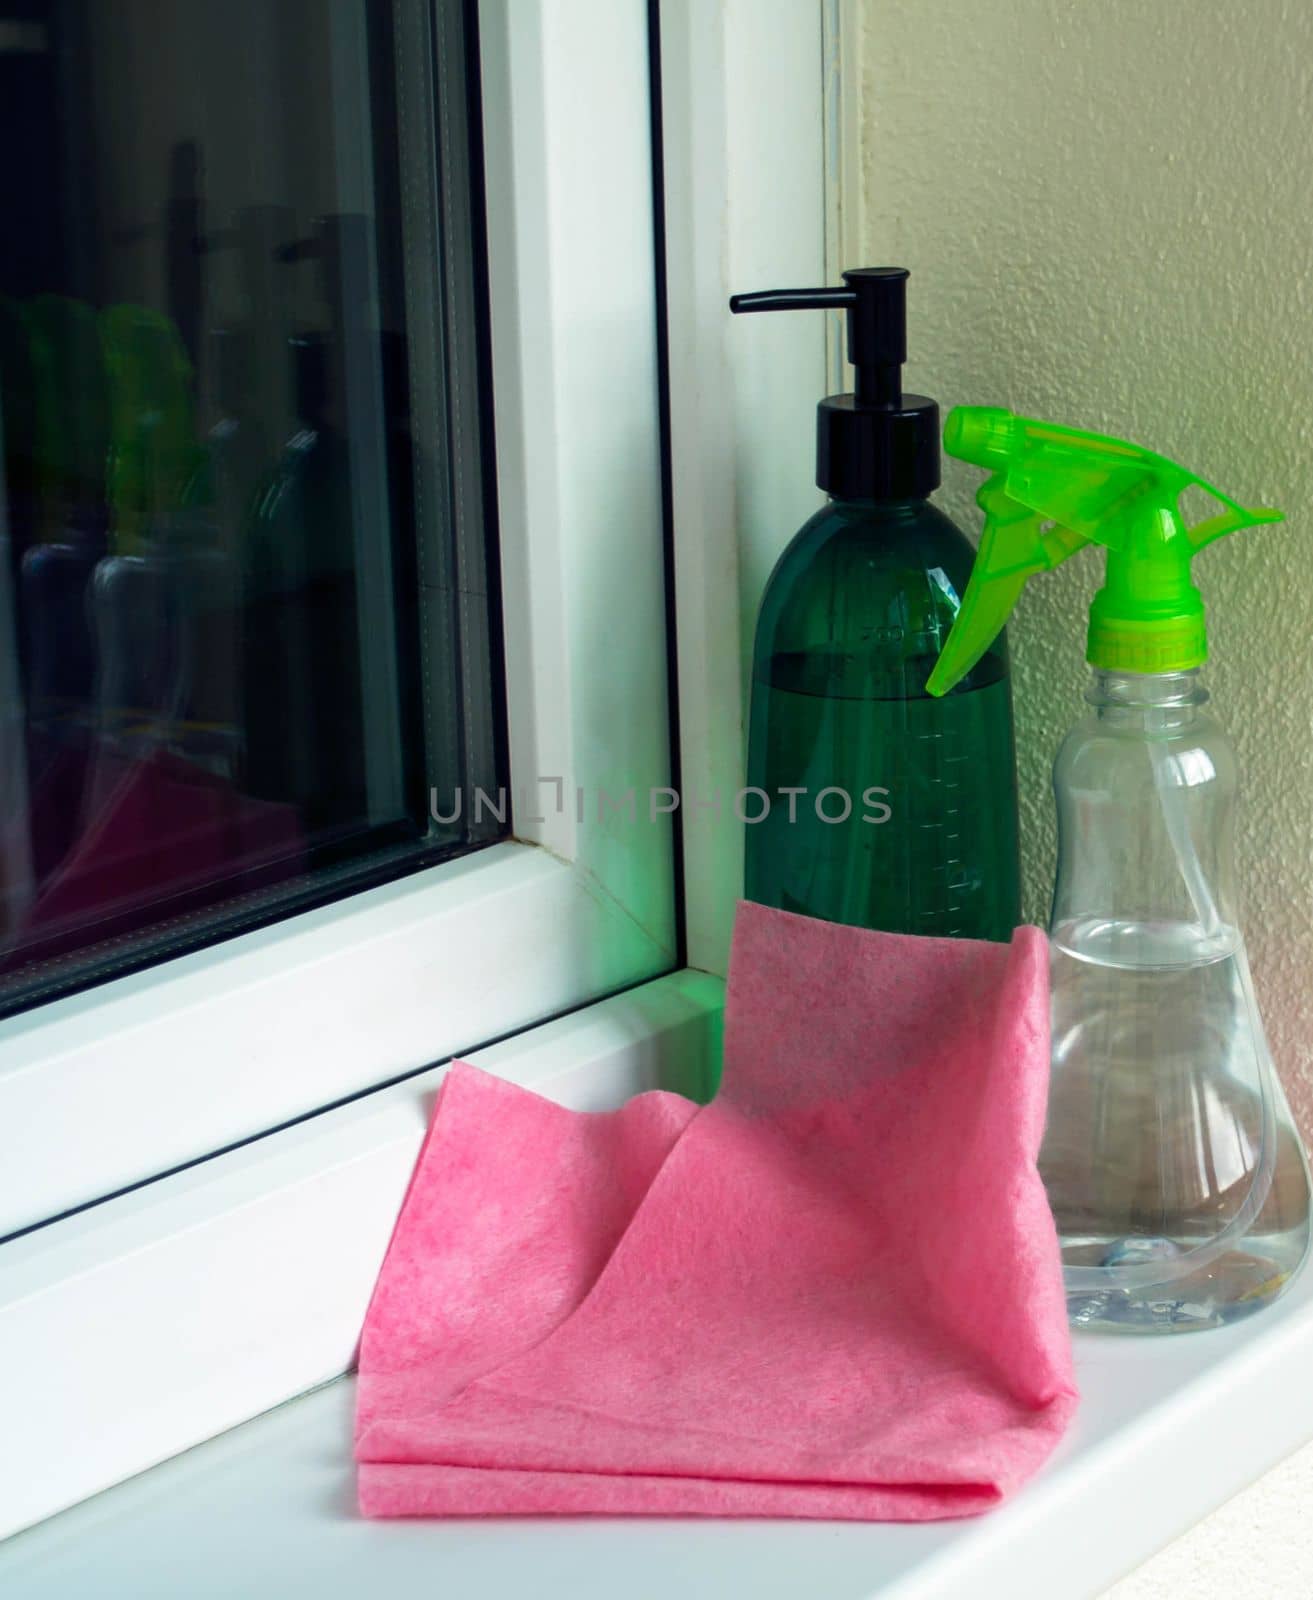 Window washing. In the photo, a sprayer, a rag are on the windowsill.